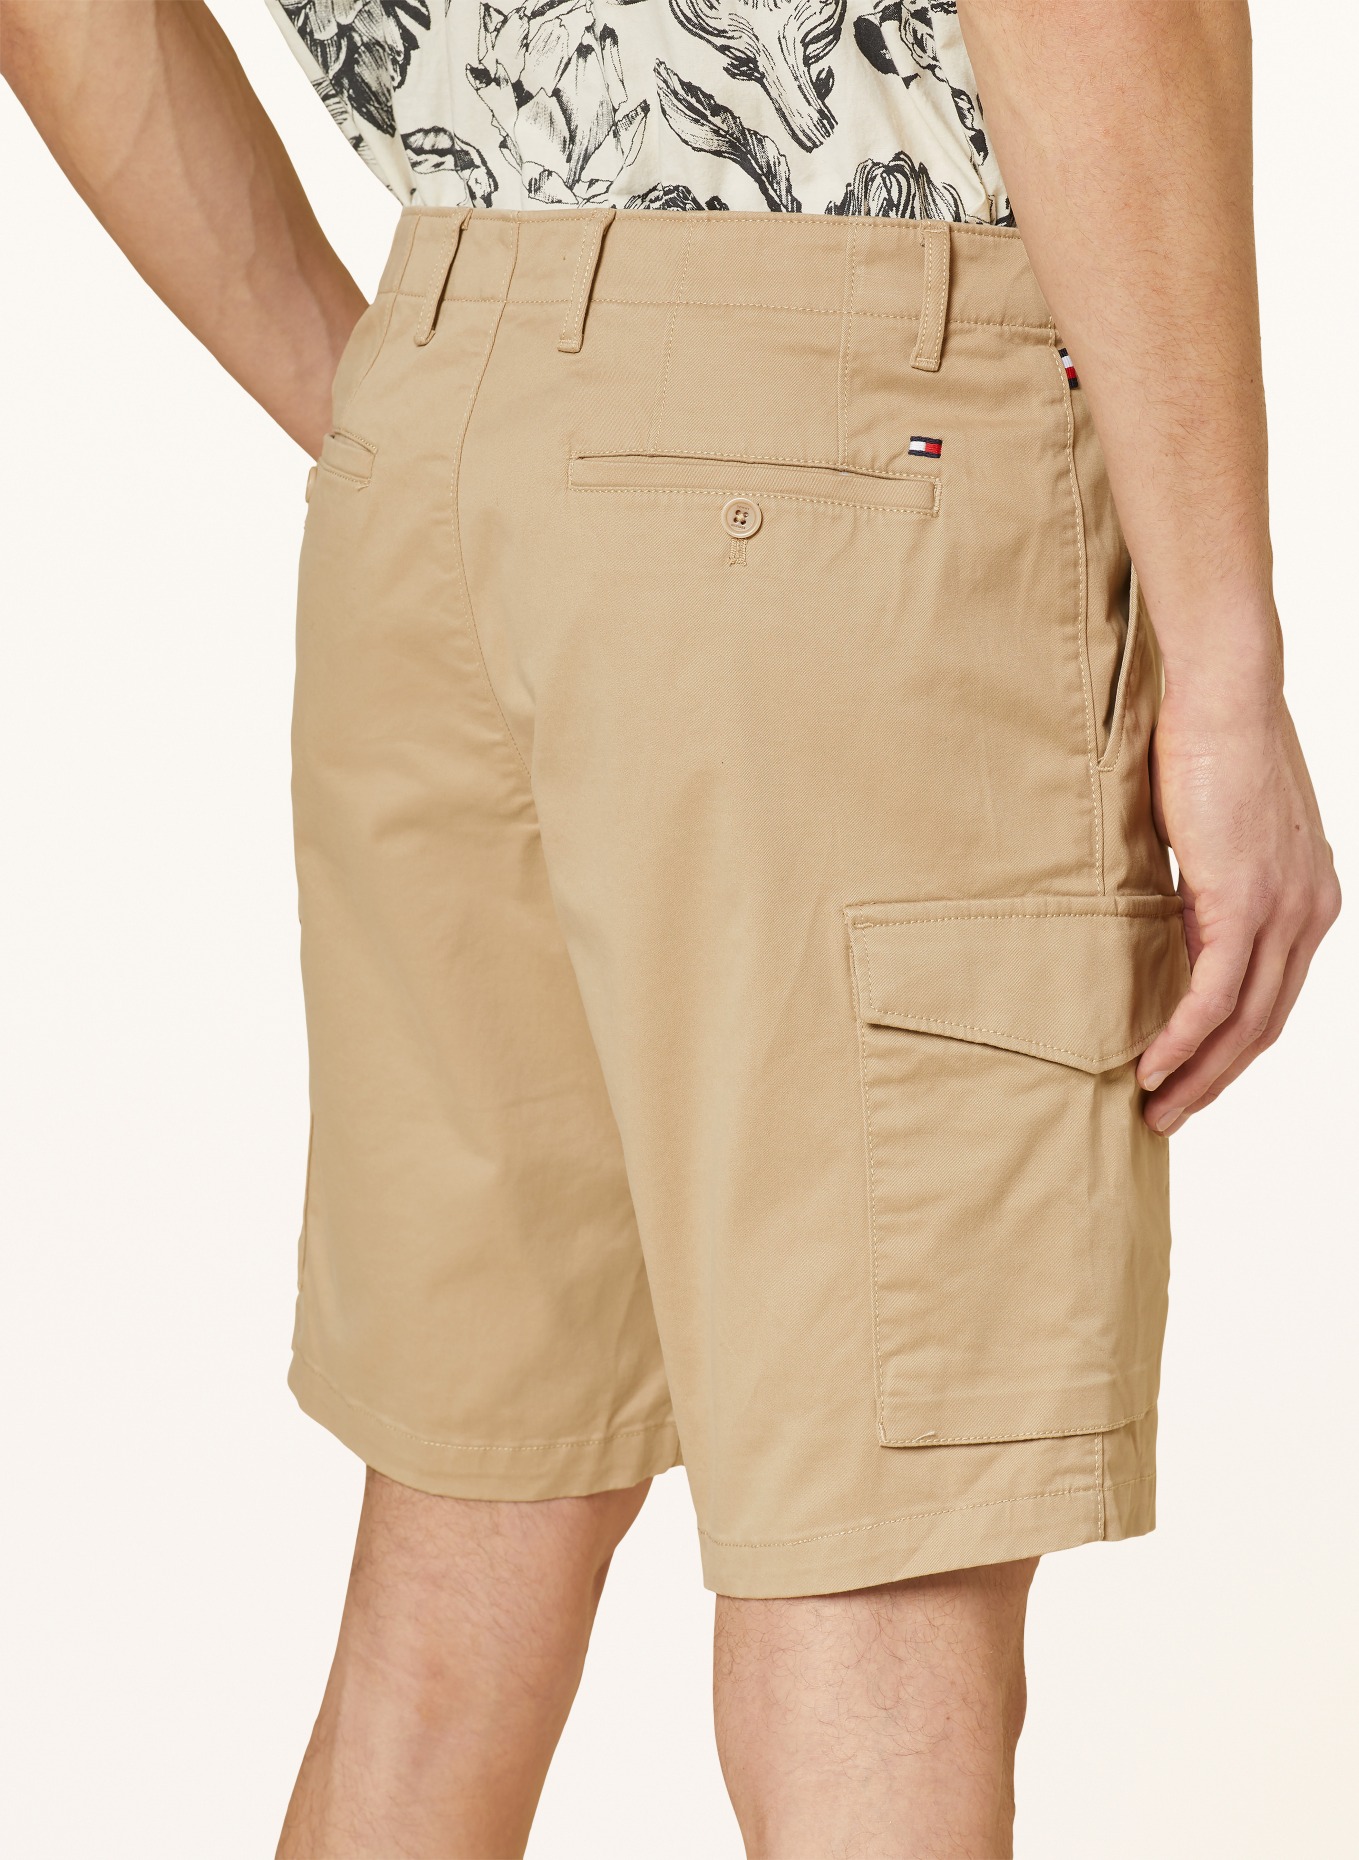 TOMMY HILFIGER Cargoshorts HARLEM Relaxed Tapered Fit, Farbe: BEIGE (Bild 6)